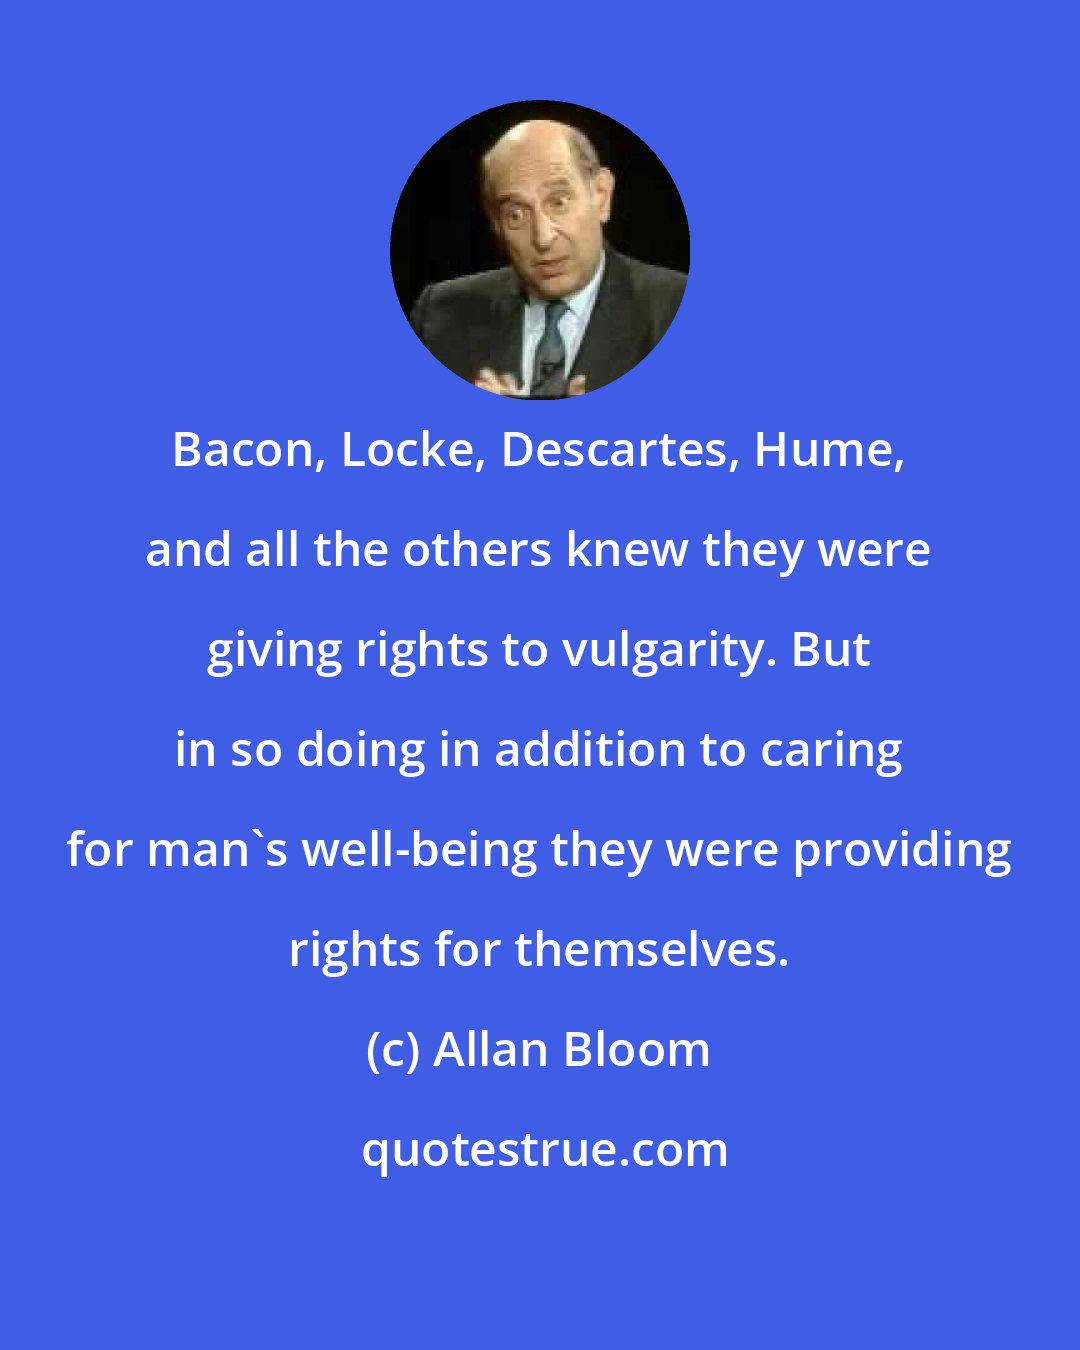 Allan Bloom: Bacon, Locke, Descartes, Hume, and all the others knew they were giving rights to vulgarity. But in so doing in addition to caring for man's well-being they were providing rights for themselves.